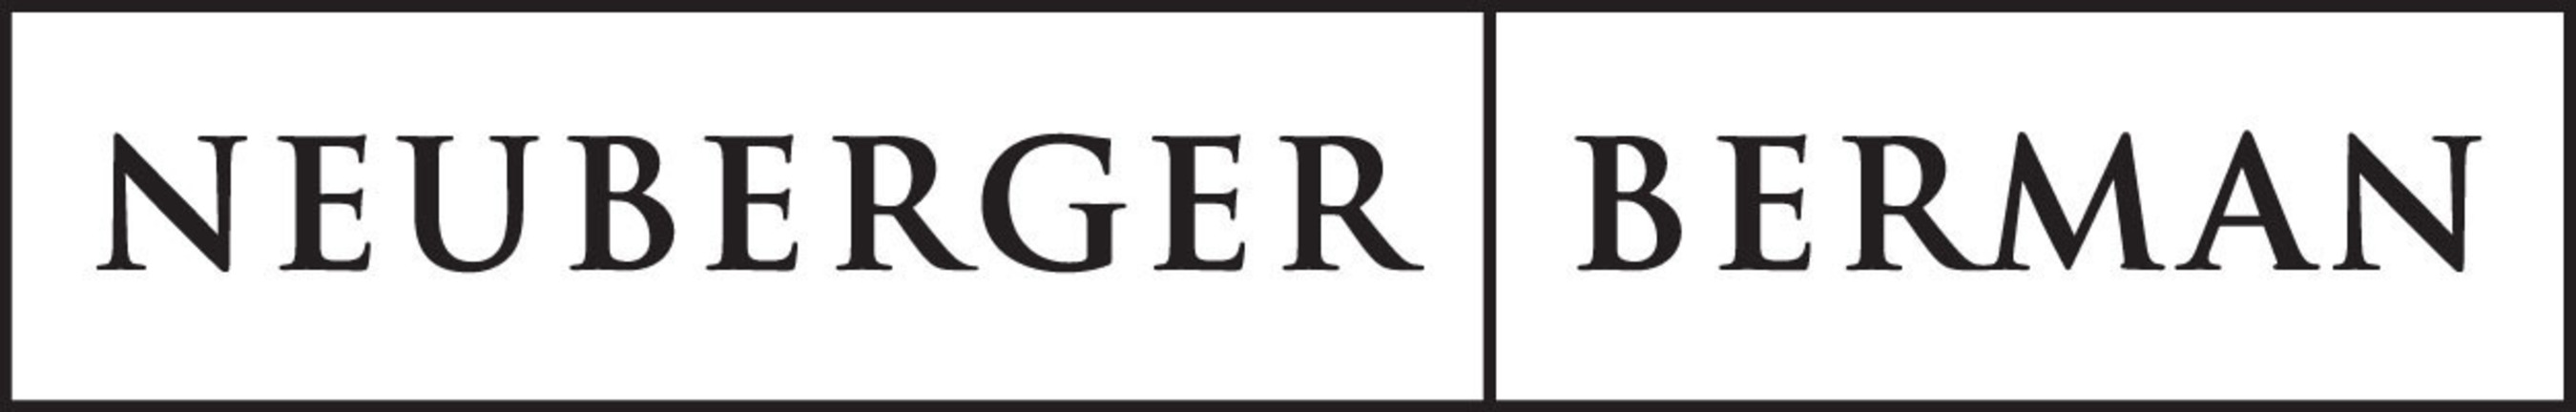 Neuberger Berman, founded in 1939, is a private, independent, employee-owned investment manager. The firm manages equities, fixed income, private equity and hedge fund portfolios for institutions and advisors worldwide. With offices in 18 countries, Neuberger Berman's team is more than 2,100 professionals. Tenured, stable and long-term in focus, the firm fosters an investment culture of fundamental research and independent thinking. For more information, please visit our website at www.nb.com.